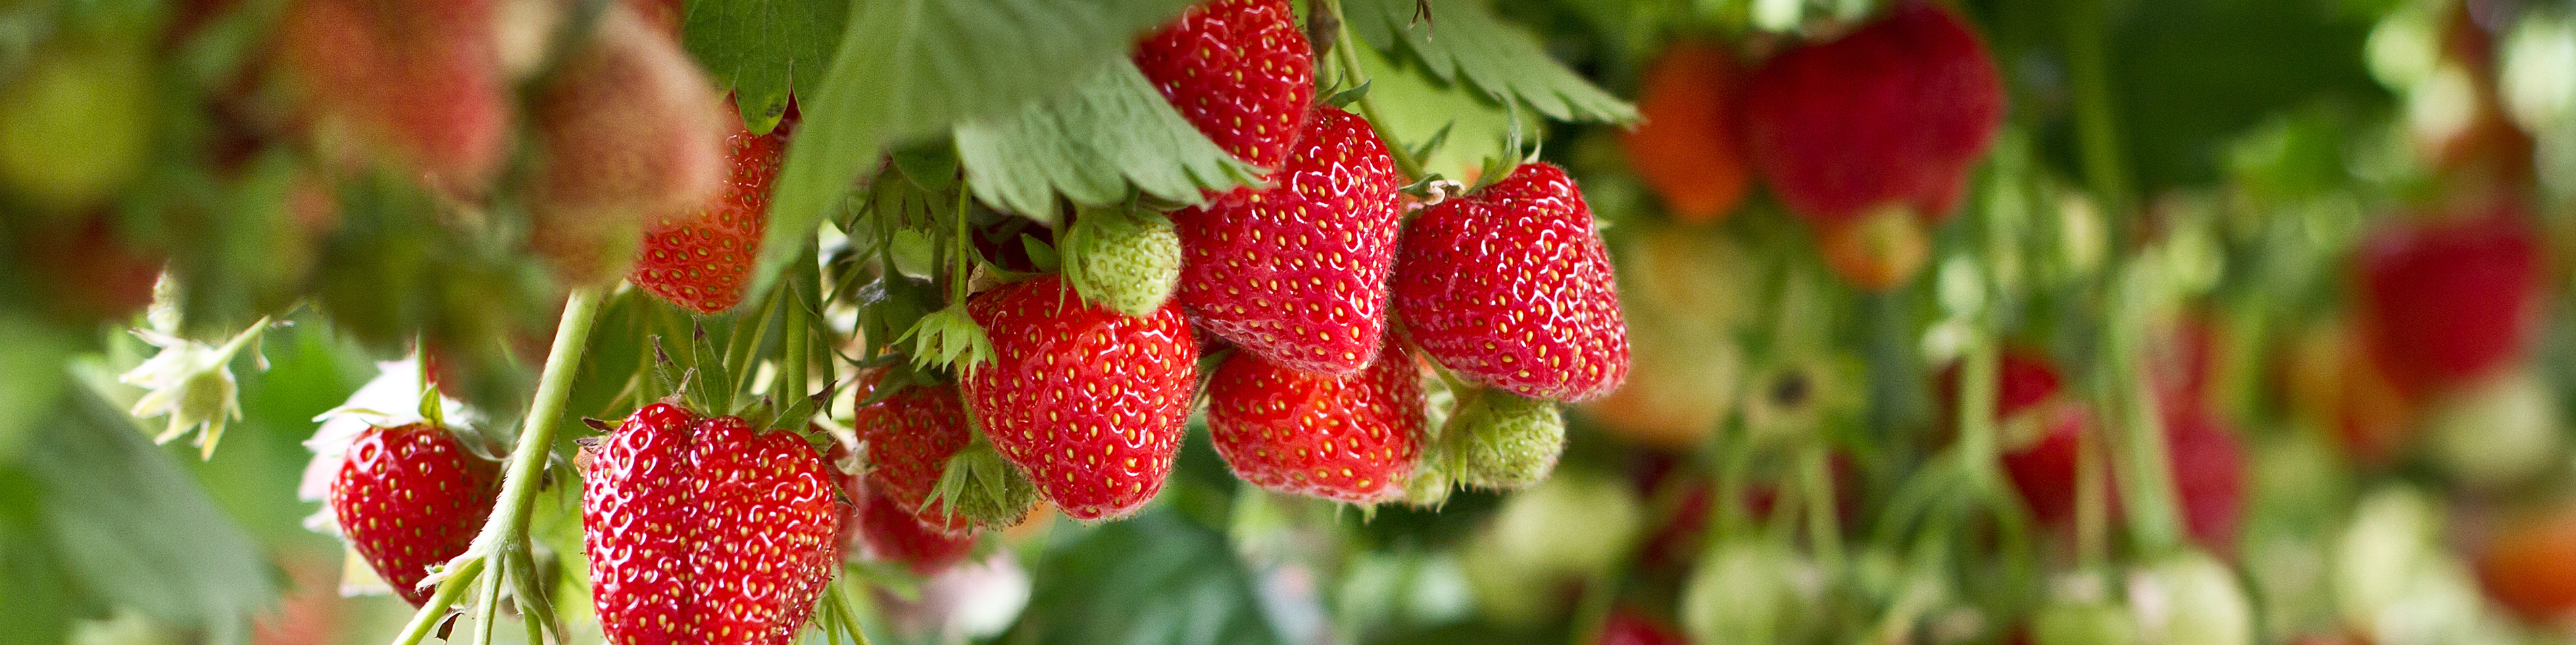 close up of a strawberry crop